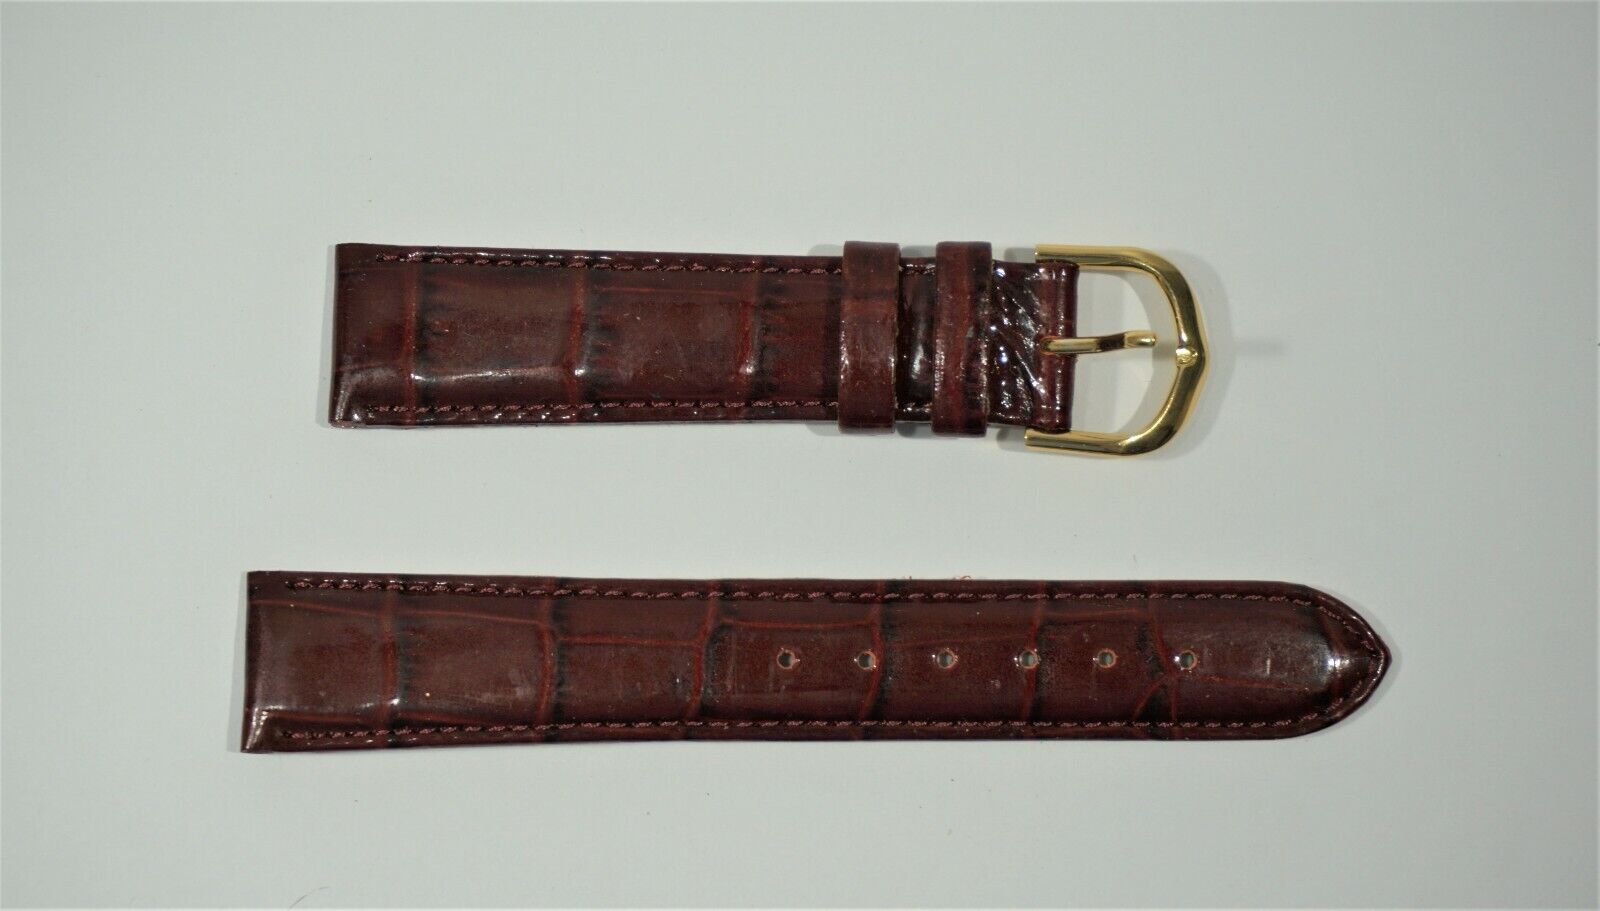 Banda Bordeau Red Croc Embossed Leather Watch Band Strap Size 18mm x 16mm